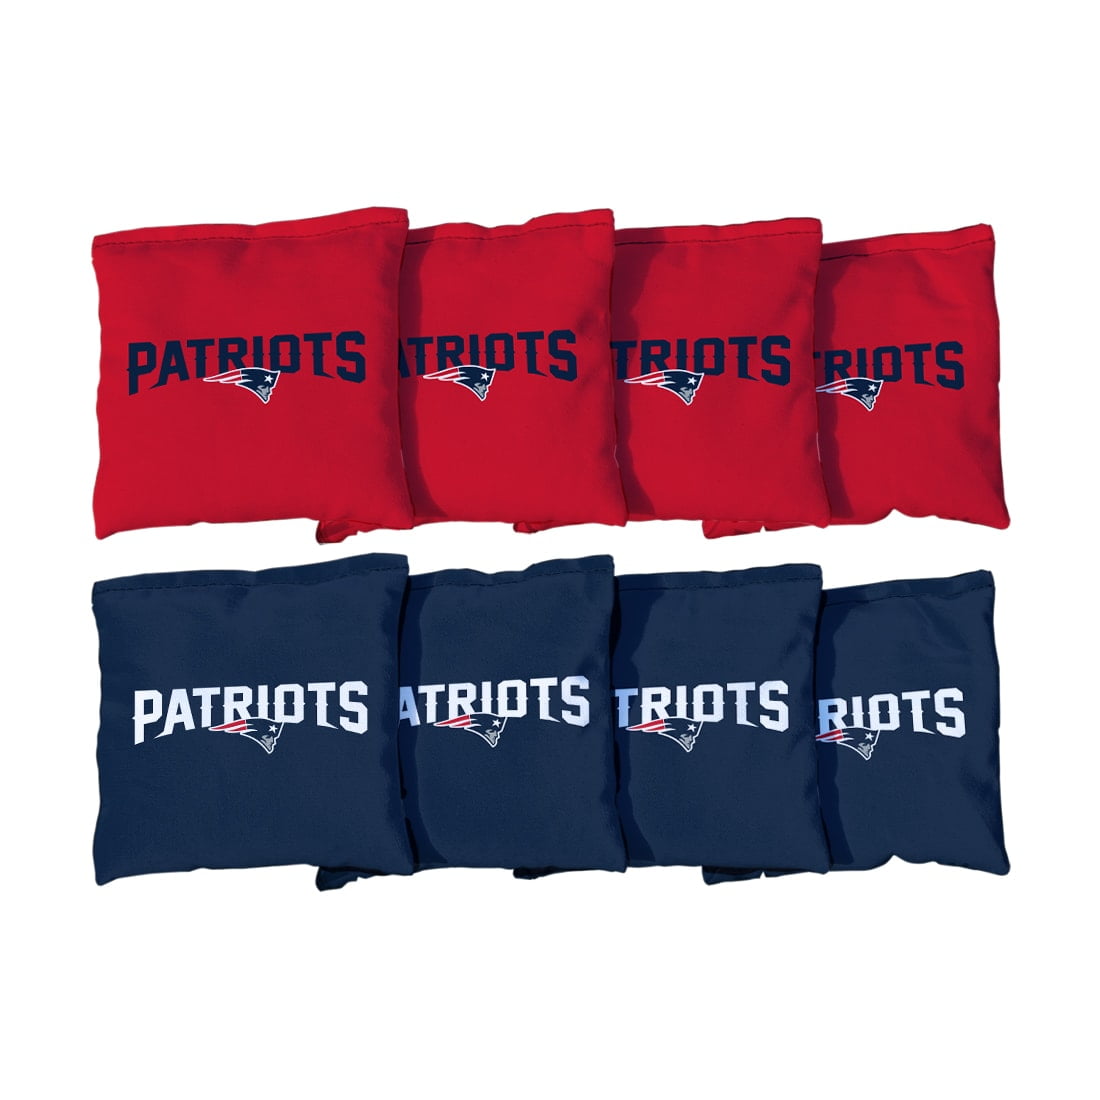 New England Patriots Embroidered cornhole bags..homemade